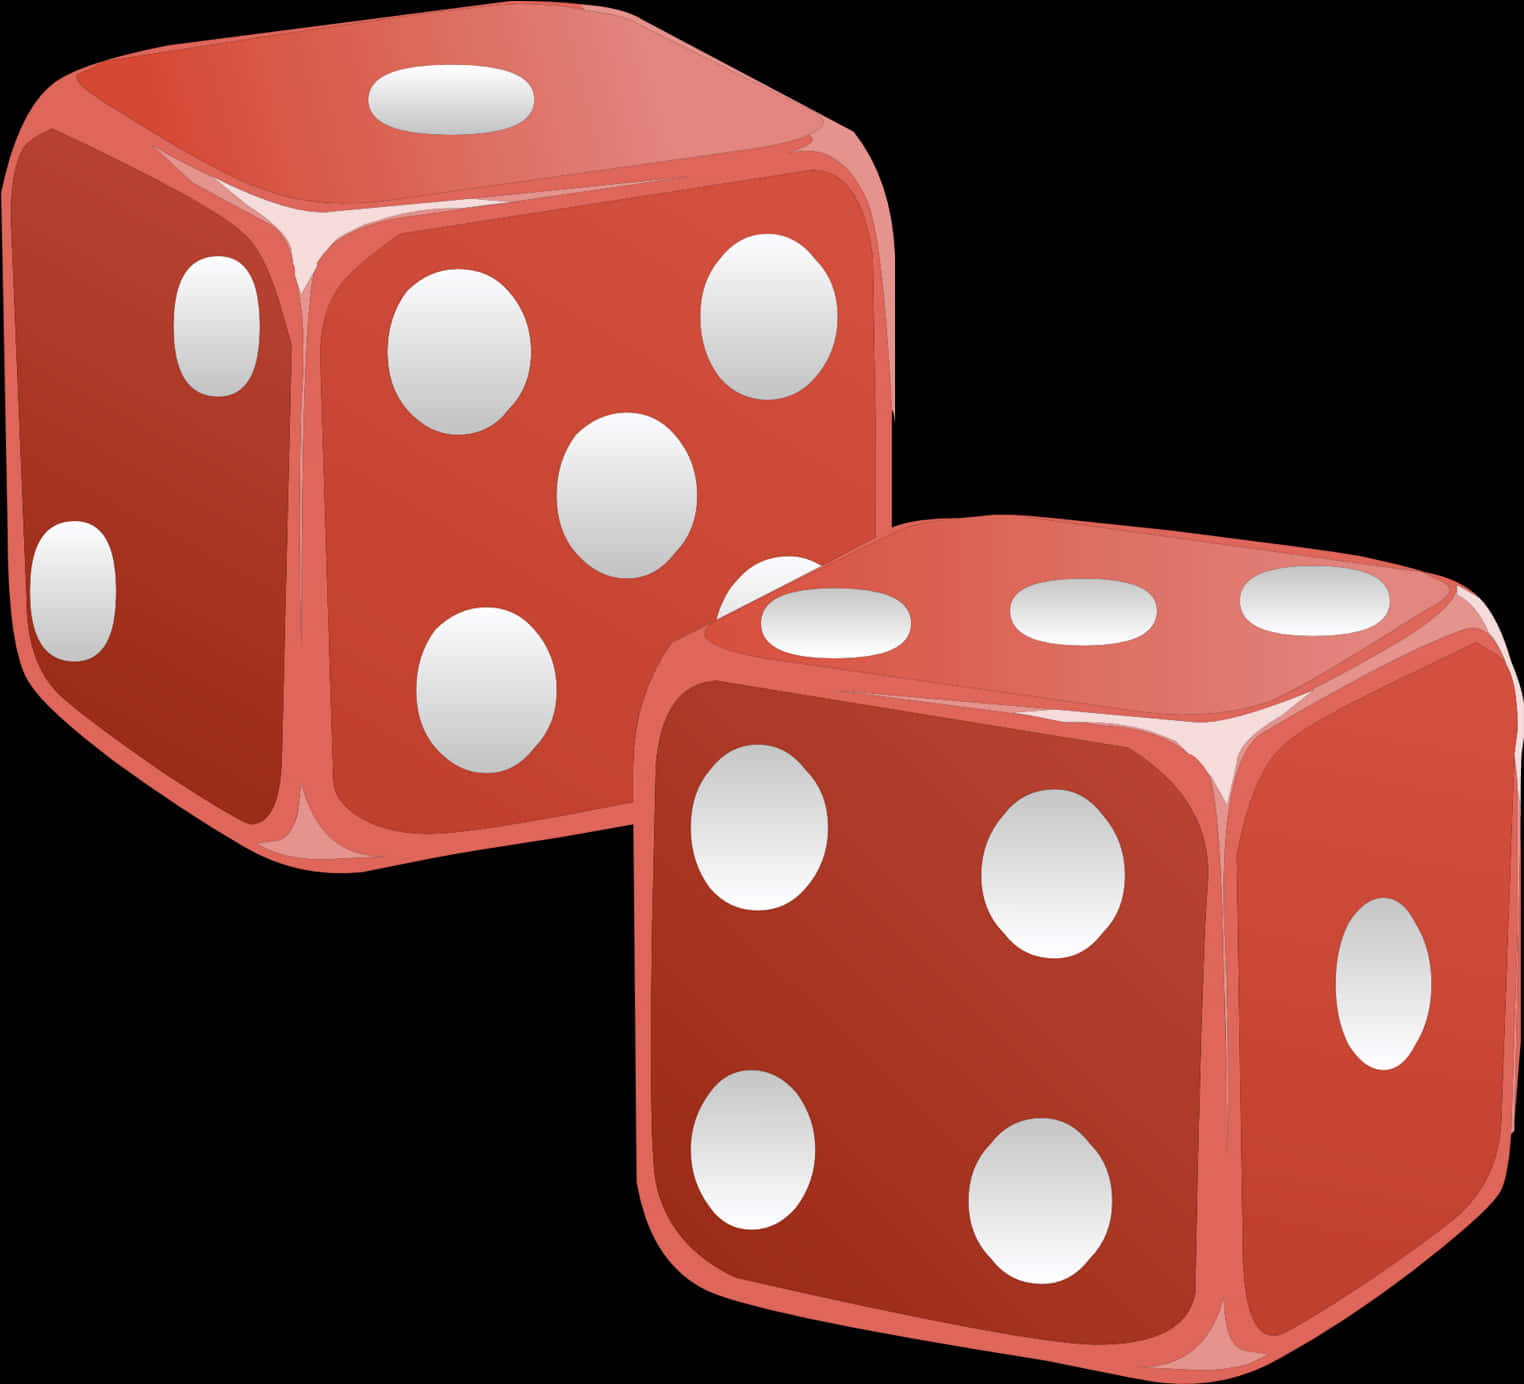 Red Dice Illustration PNG